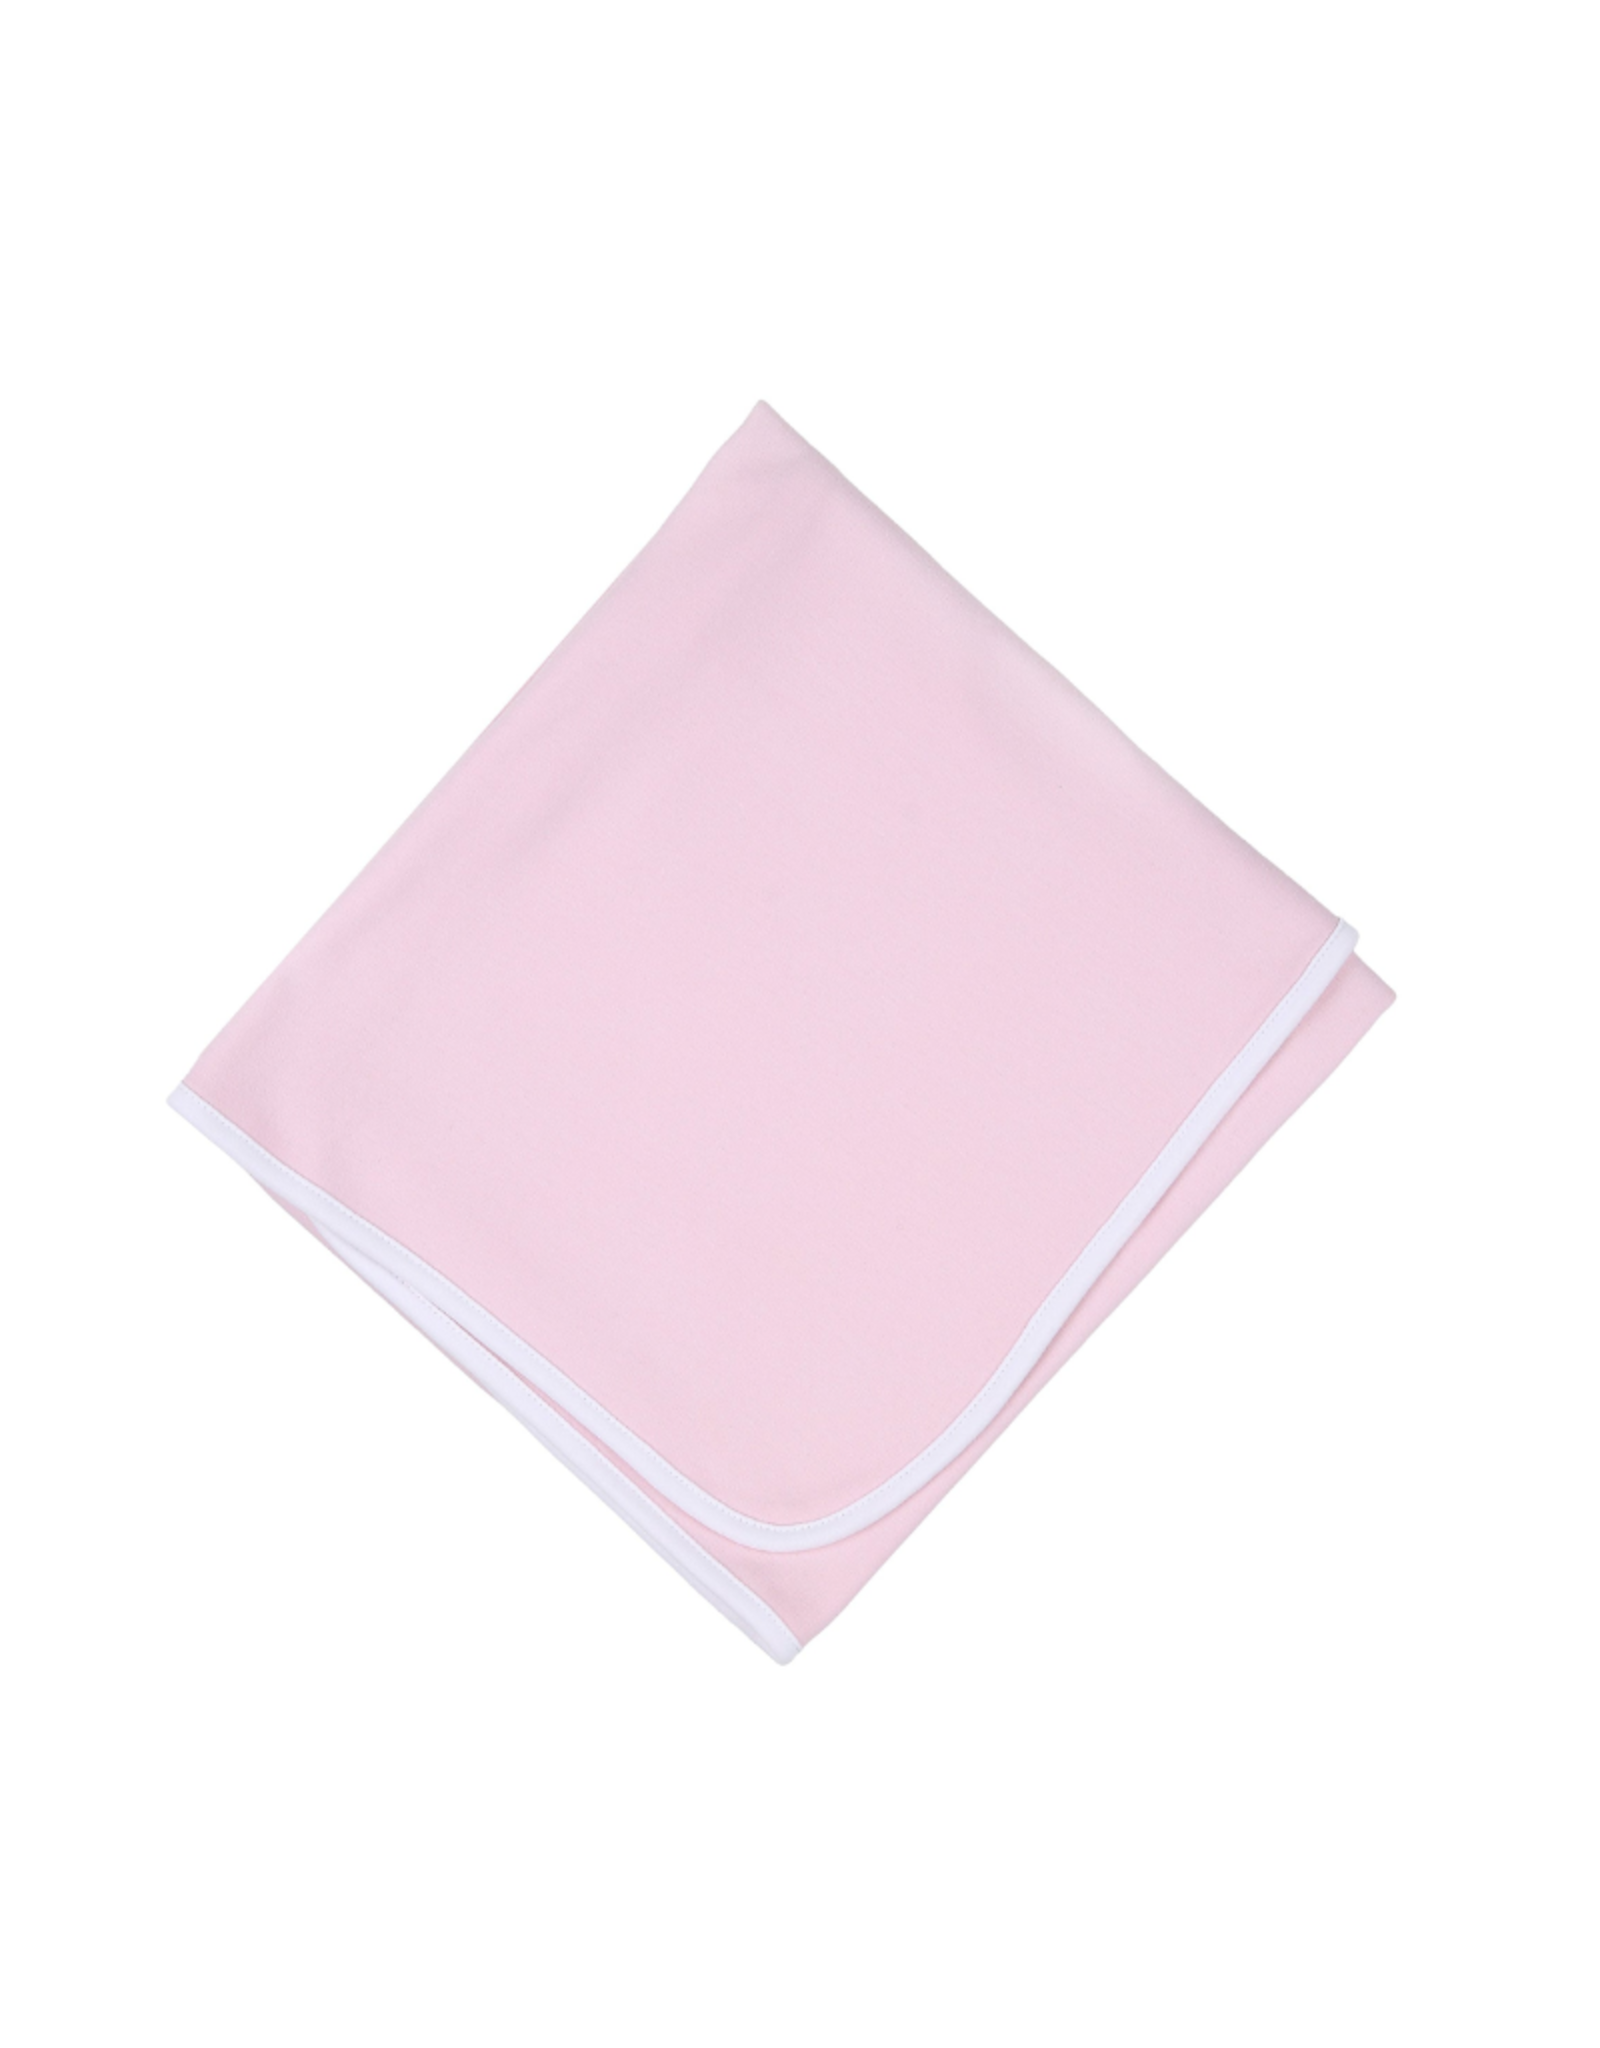 Magnolia Baby Simply Solids Receiving Blanket, Pink